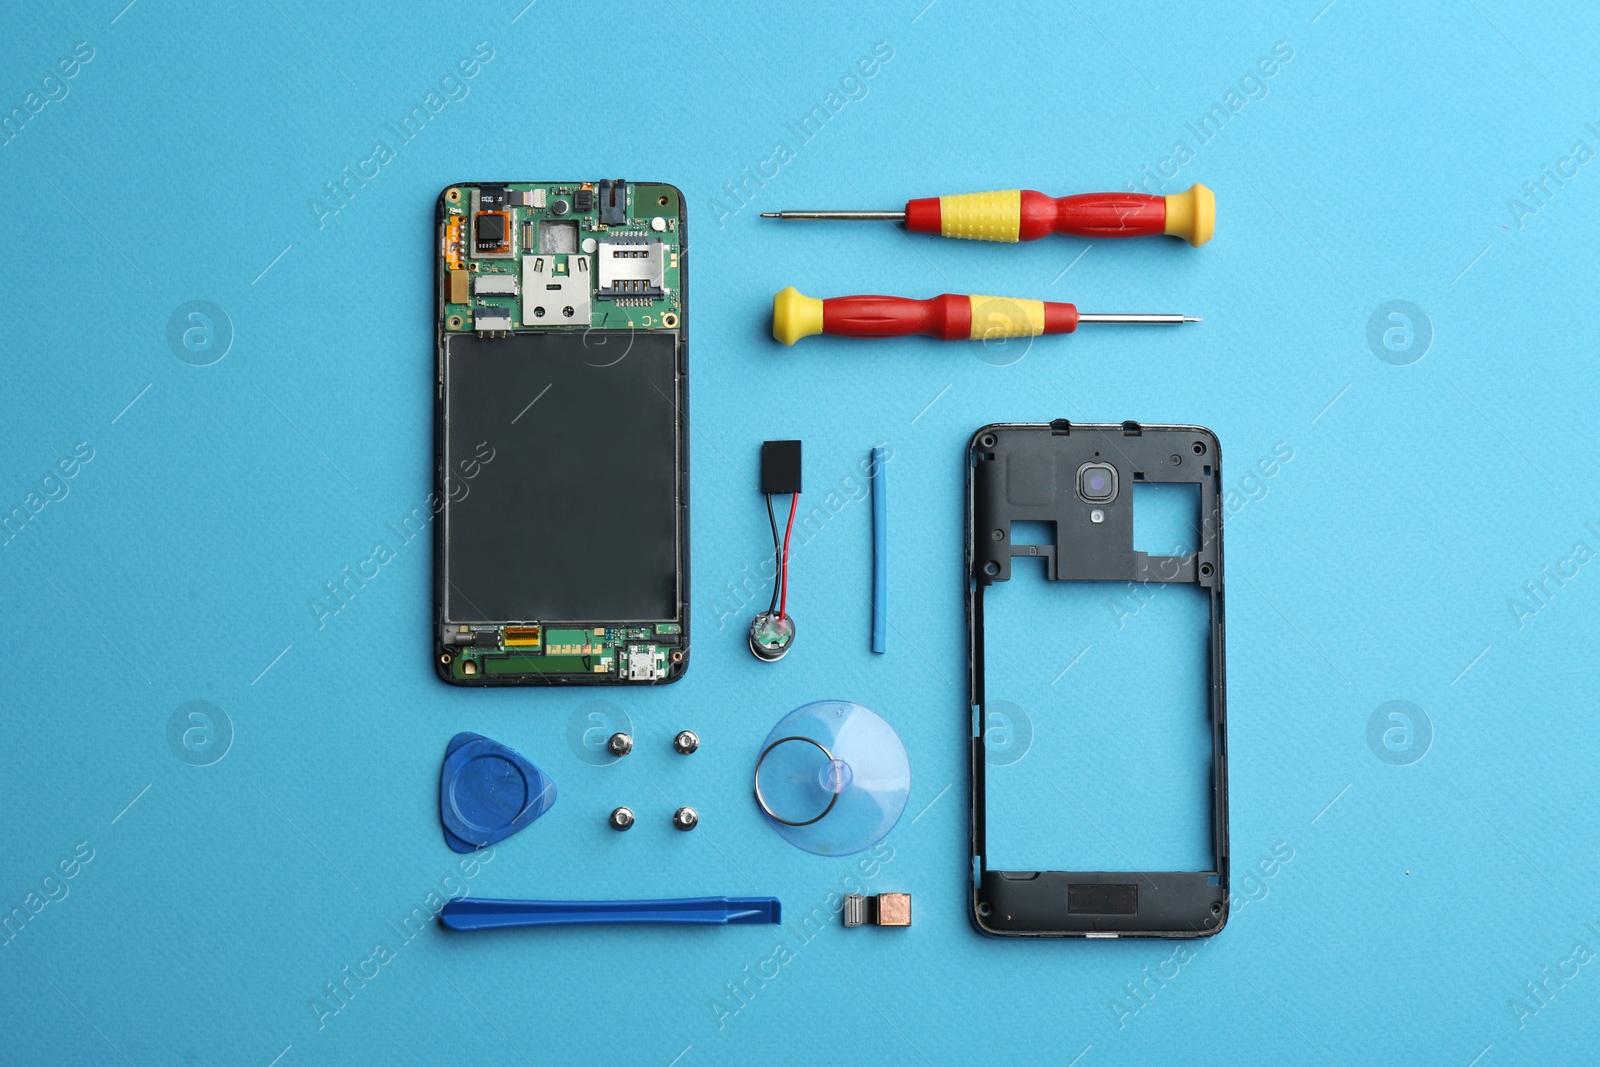 Photo of Disassembled mobile phone and repair tools on blue background, flat lay